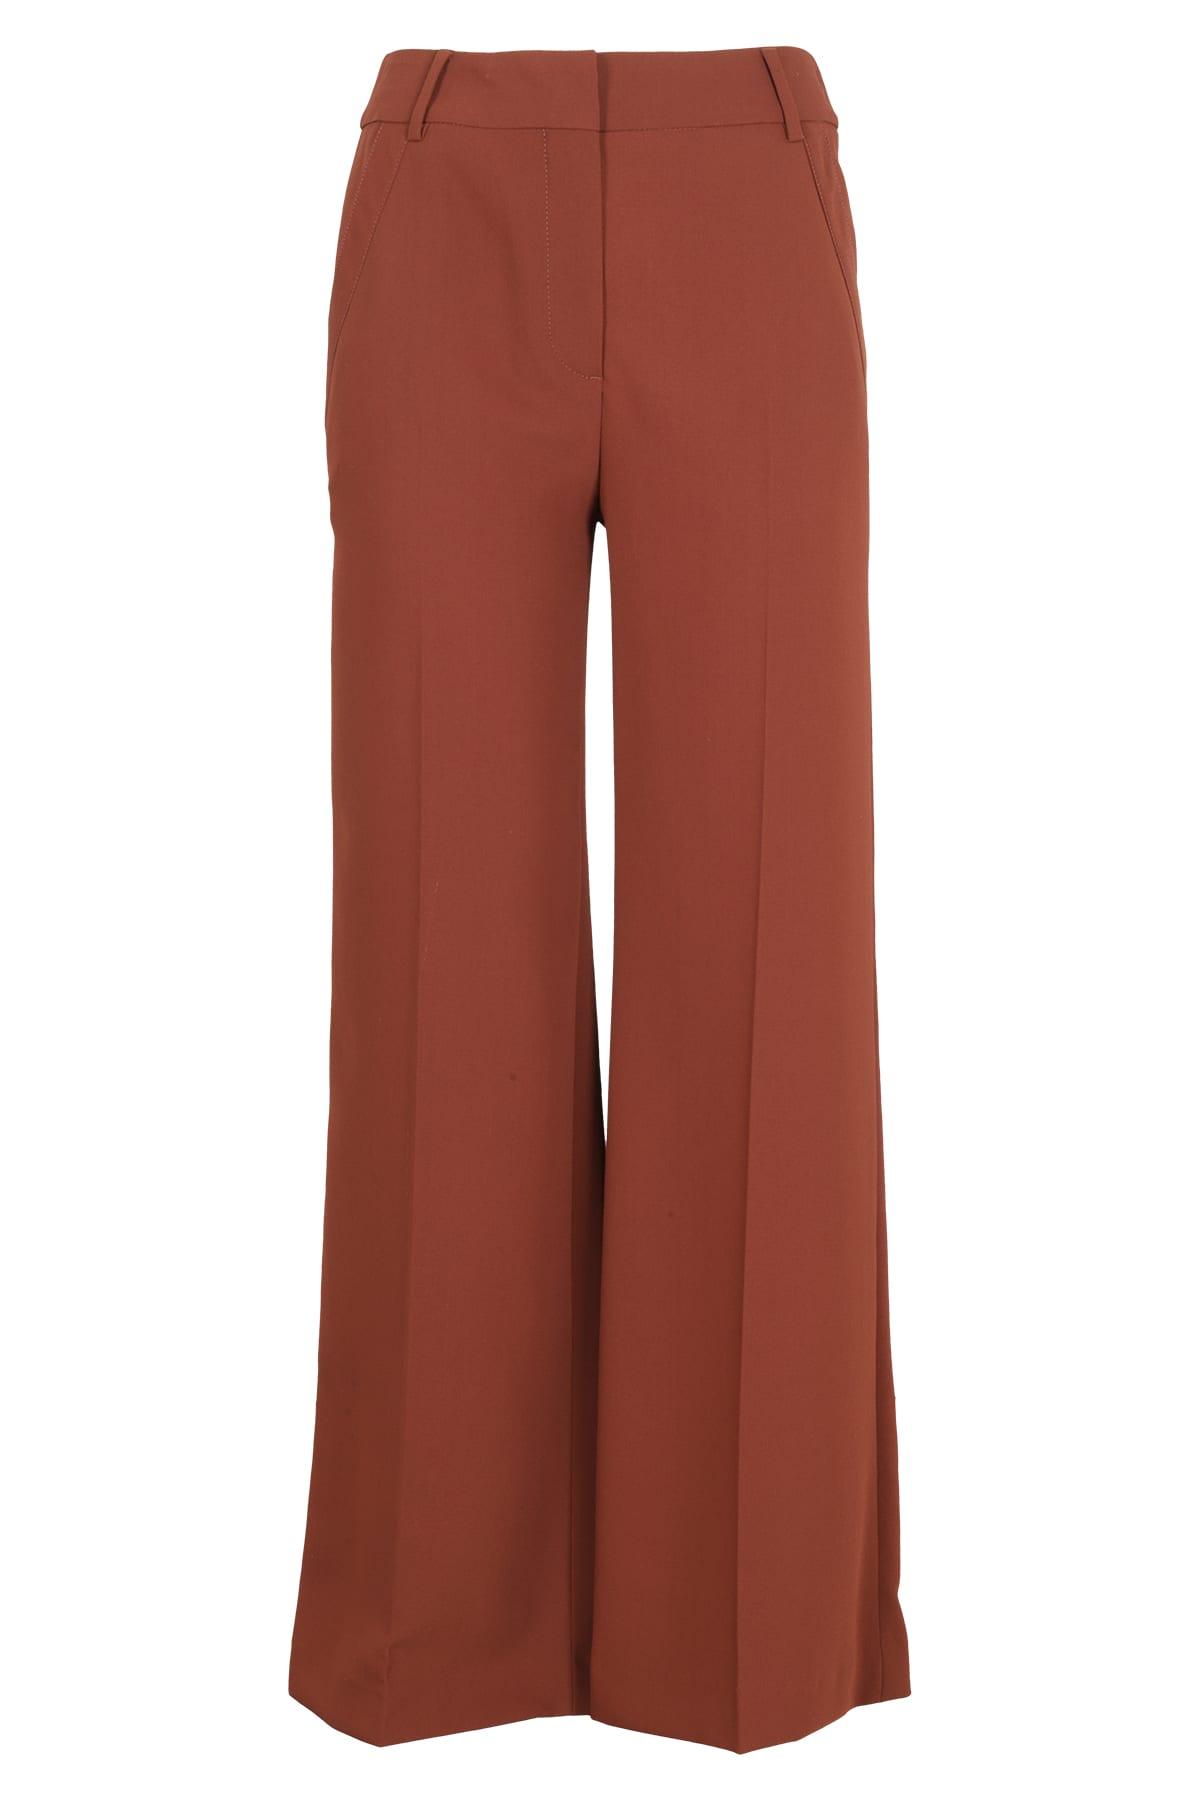 Slacks and Chinos See By Chloé Trousers Womens Trousers See By Chloé Synthetic Trouser in Black Slacks and Chinos 